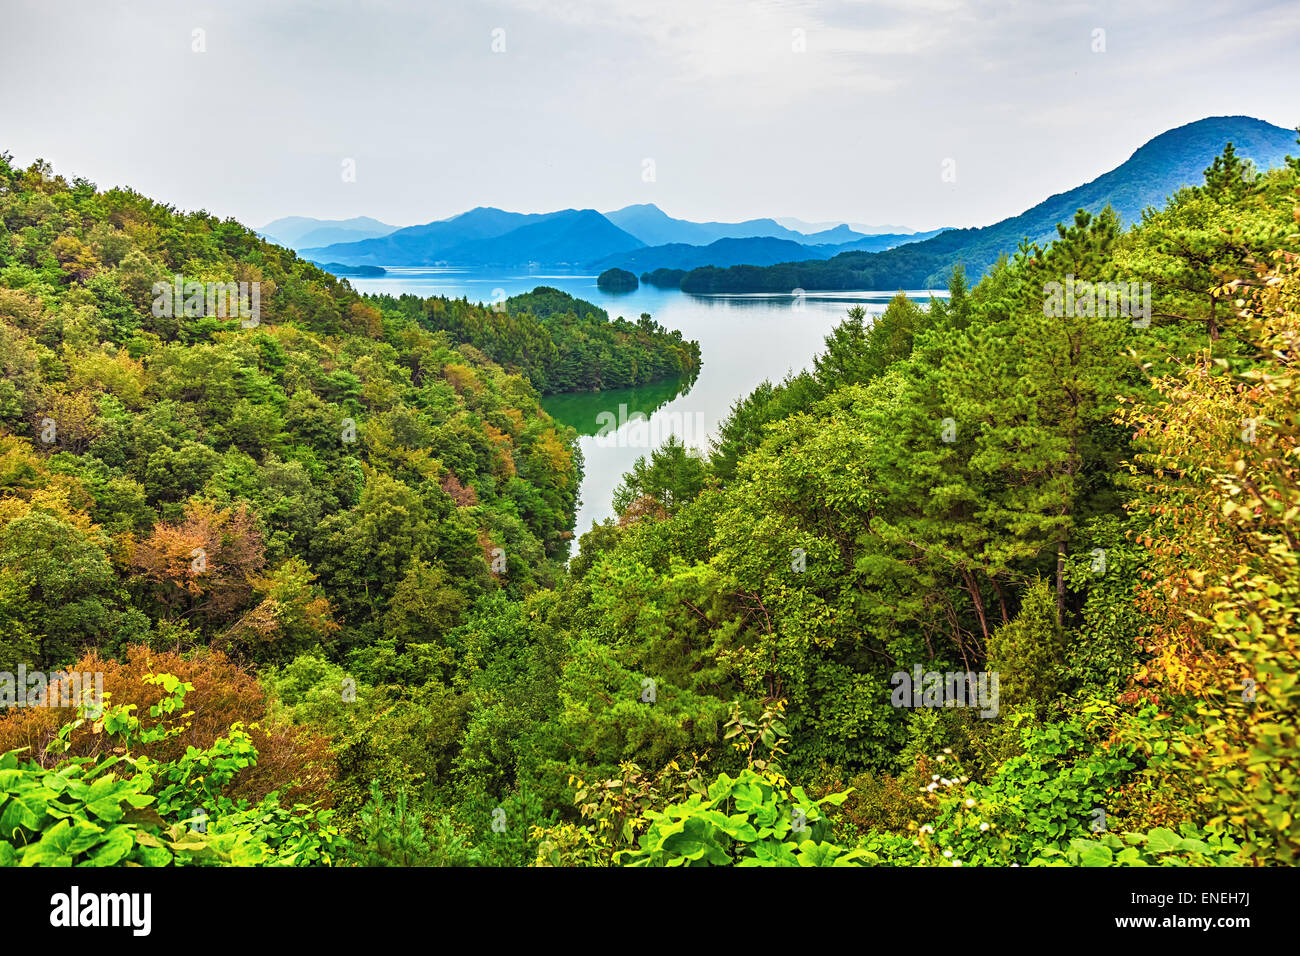 Mountains with green trees and lake landscape in South Korea Stock Photo